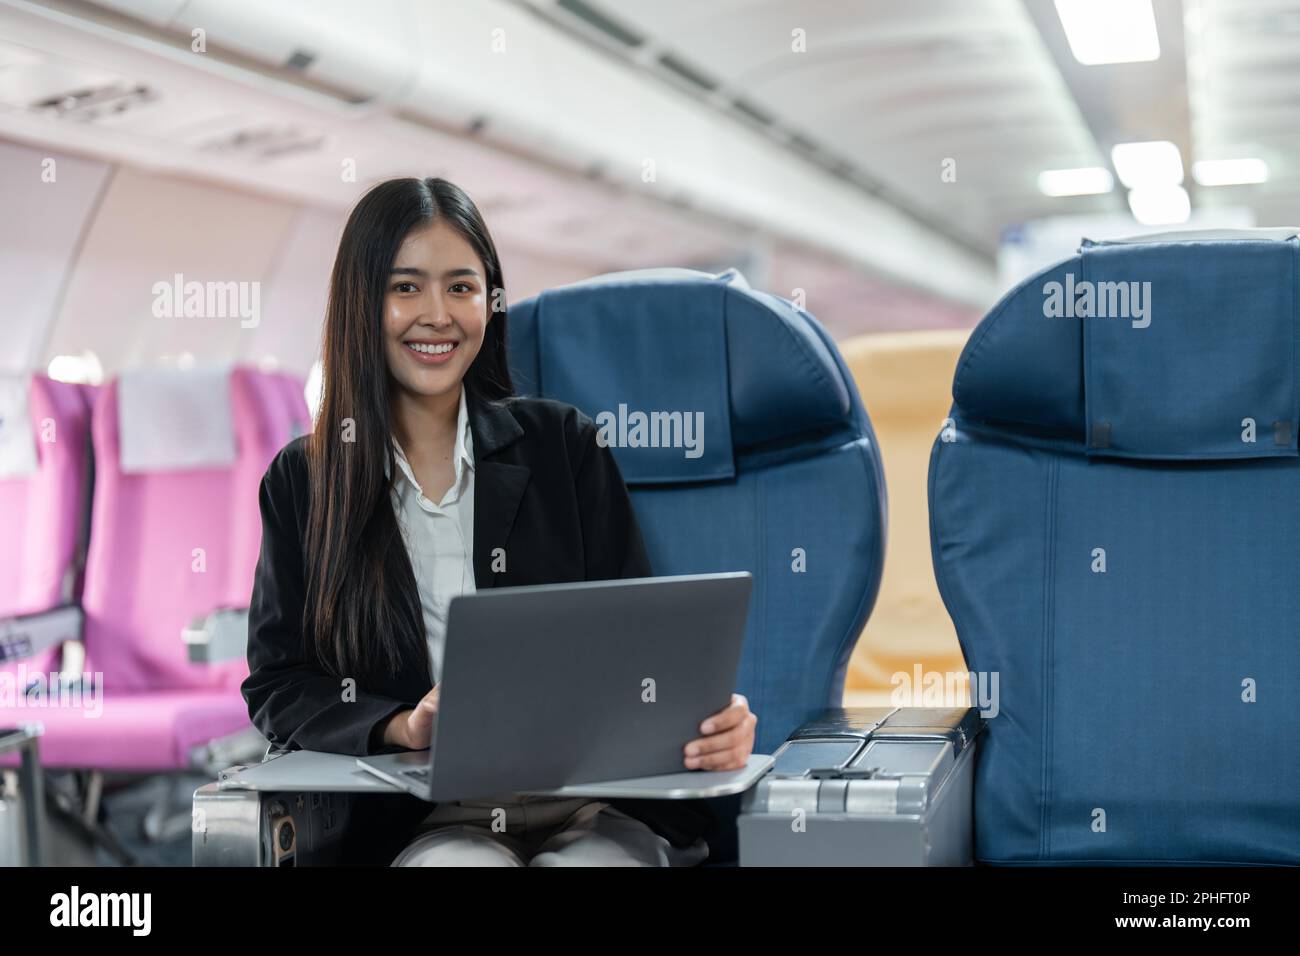 Female passenger sitting on plane while working on laptop computer with simulated space using on board wireless connection Stock Photo